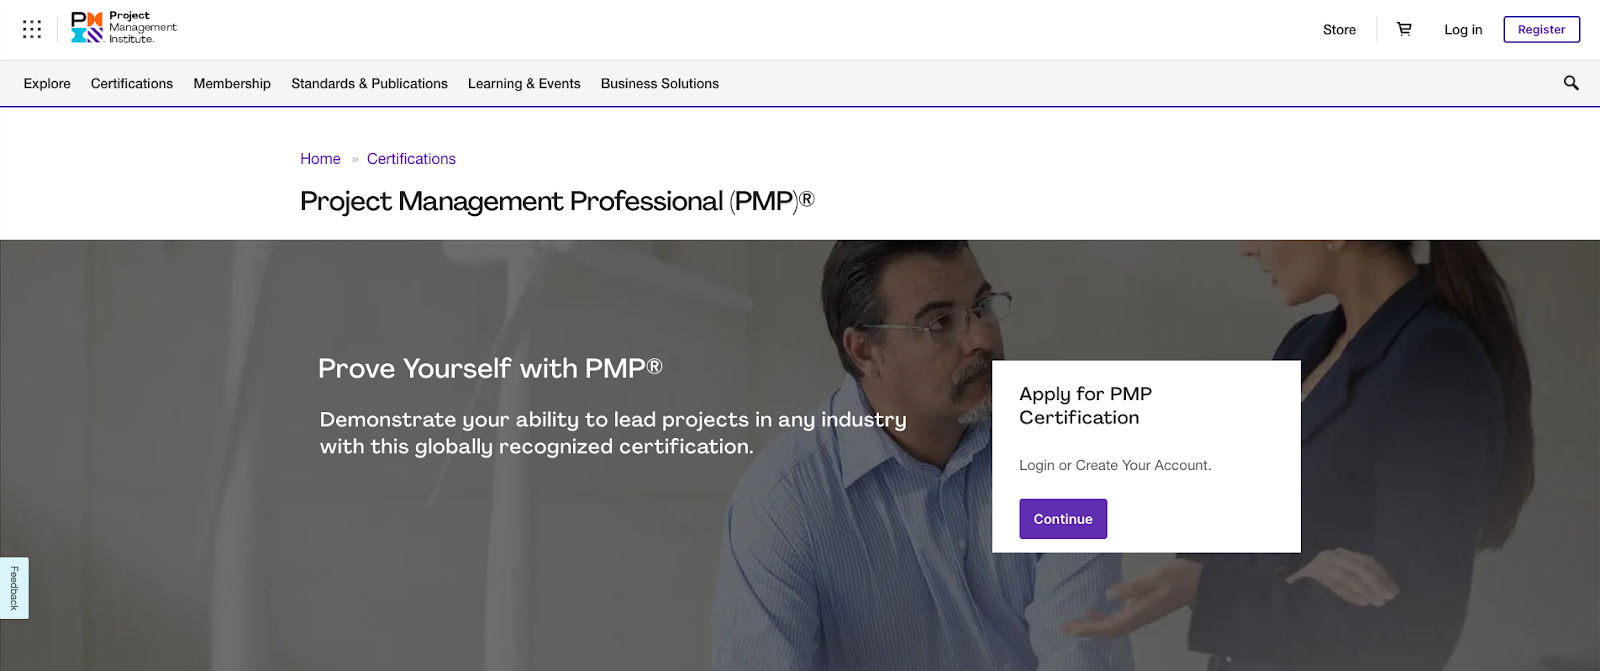 The PMP certification demonstrates your skills in managing projects.